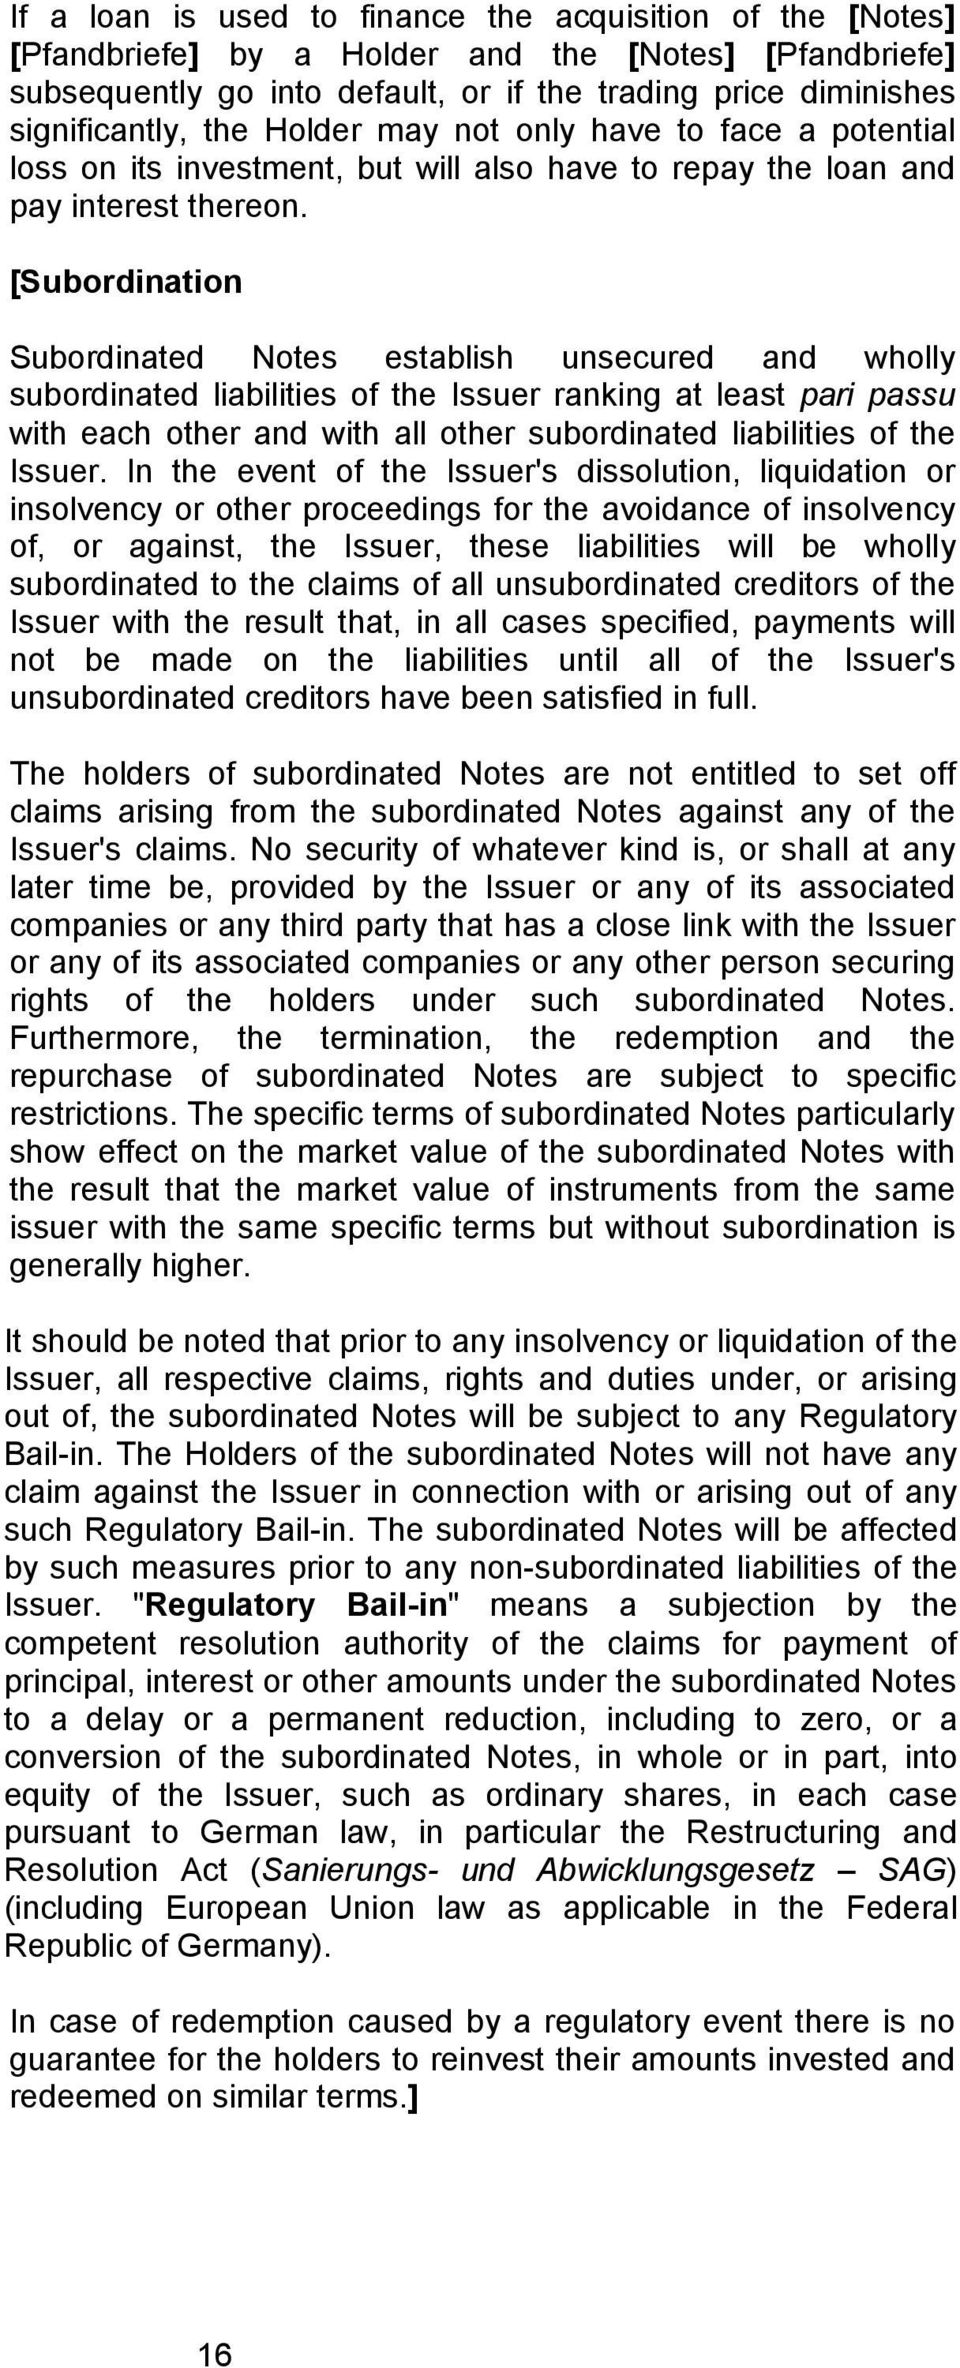 [Subordination Subordinated Notes establish unsecured and wholly subordinated liabilities of the Issuer ranking at least pari passu with each other and with all other subordinated liabilities of the